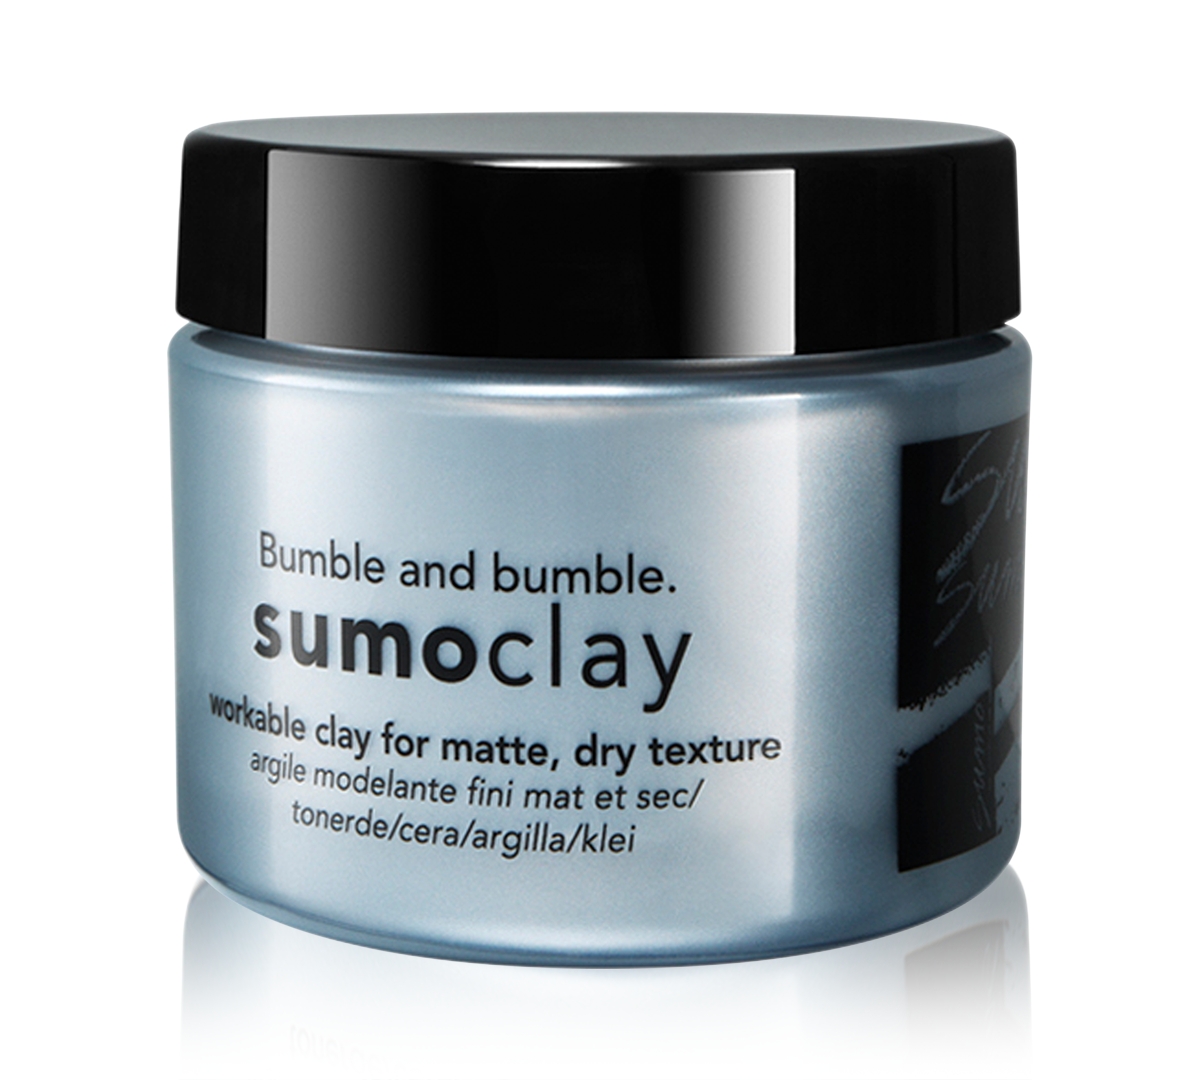 Bumble And Bumble Sumoclay, 1.5oz. In No Color